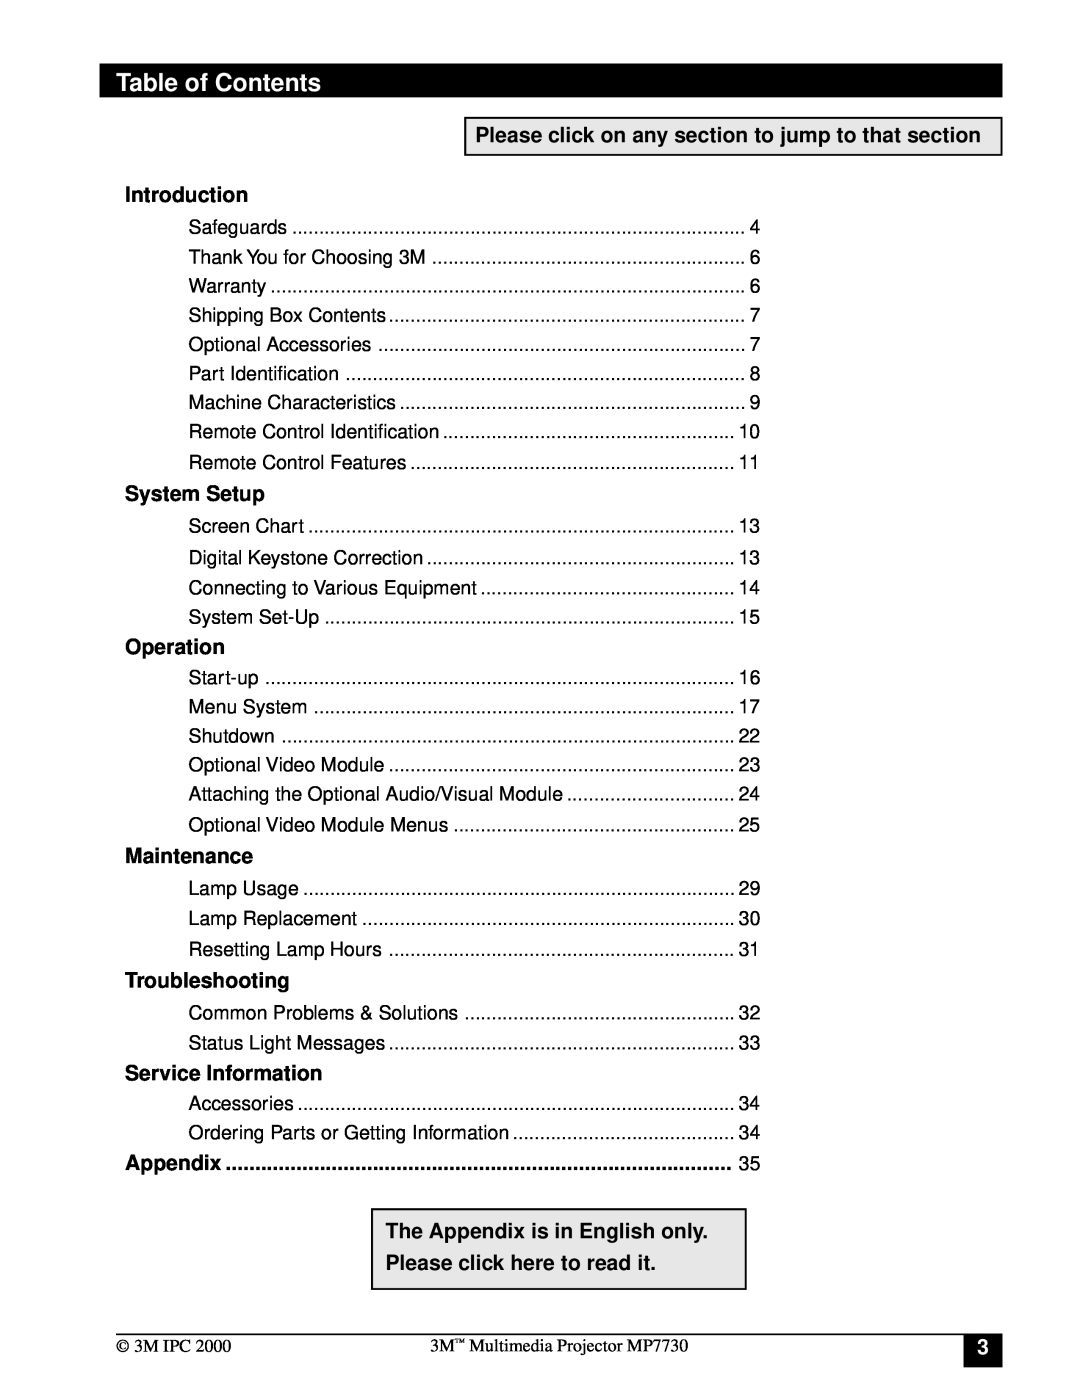 Apple MP7730 Table of Contents, Please click on any section to jump to that section, Introduction, System Setup, Operation 